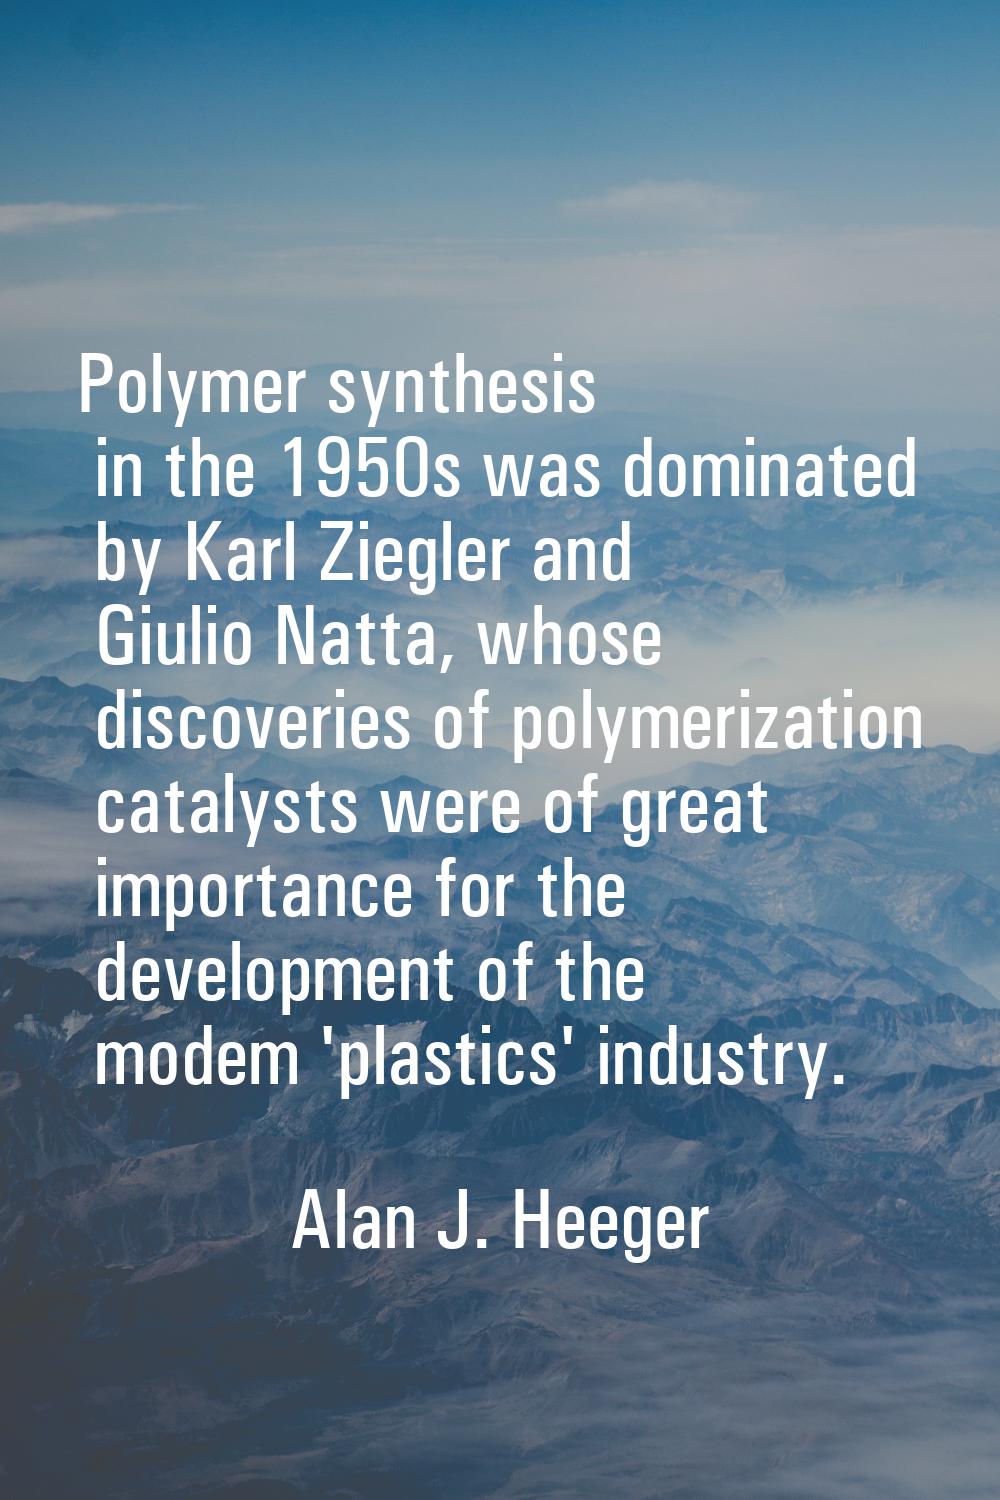 Polymer synthesis in the 1950s was dominated by Karl Ziegler and Giulio Natta, whose discoveries of